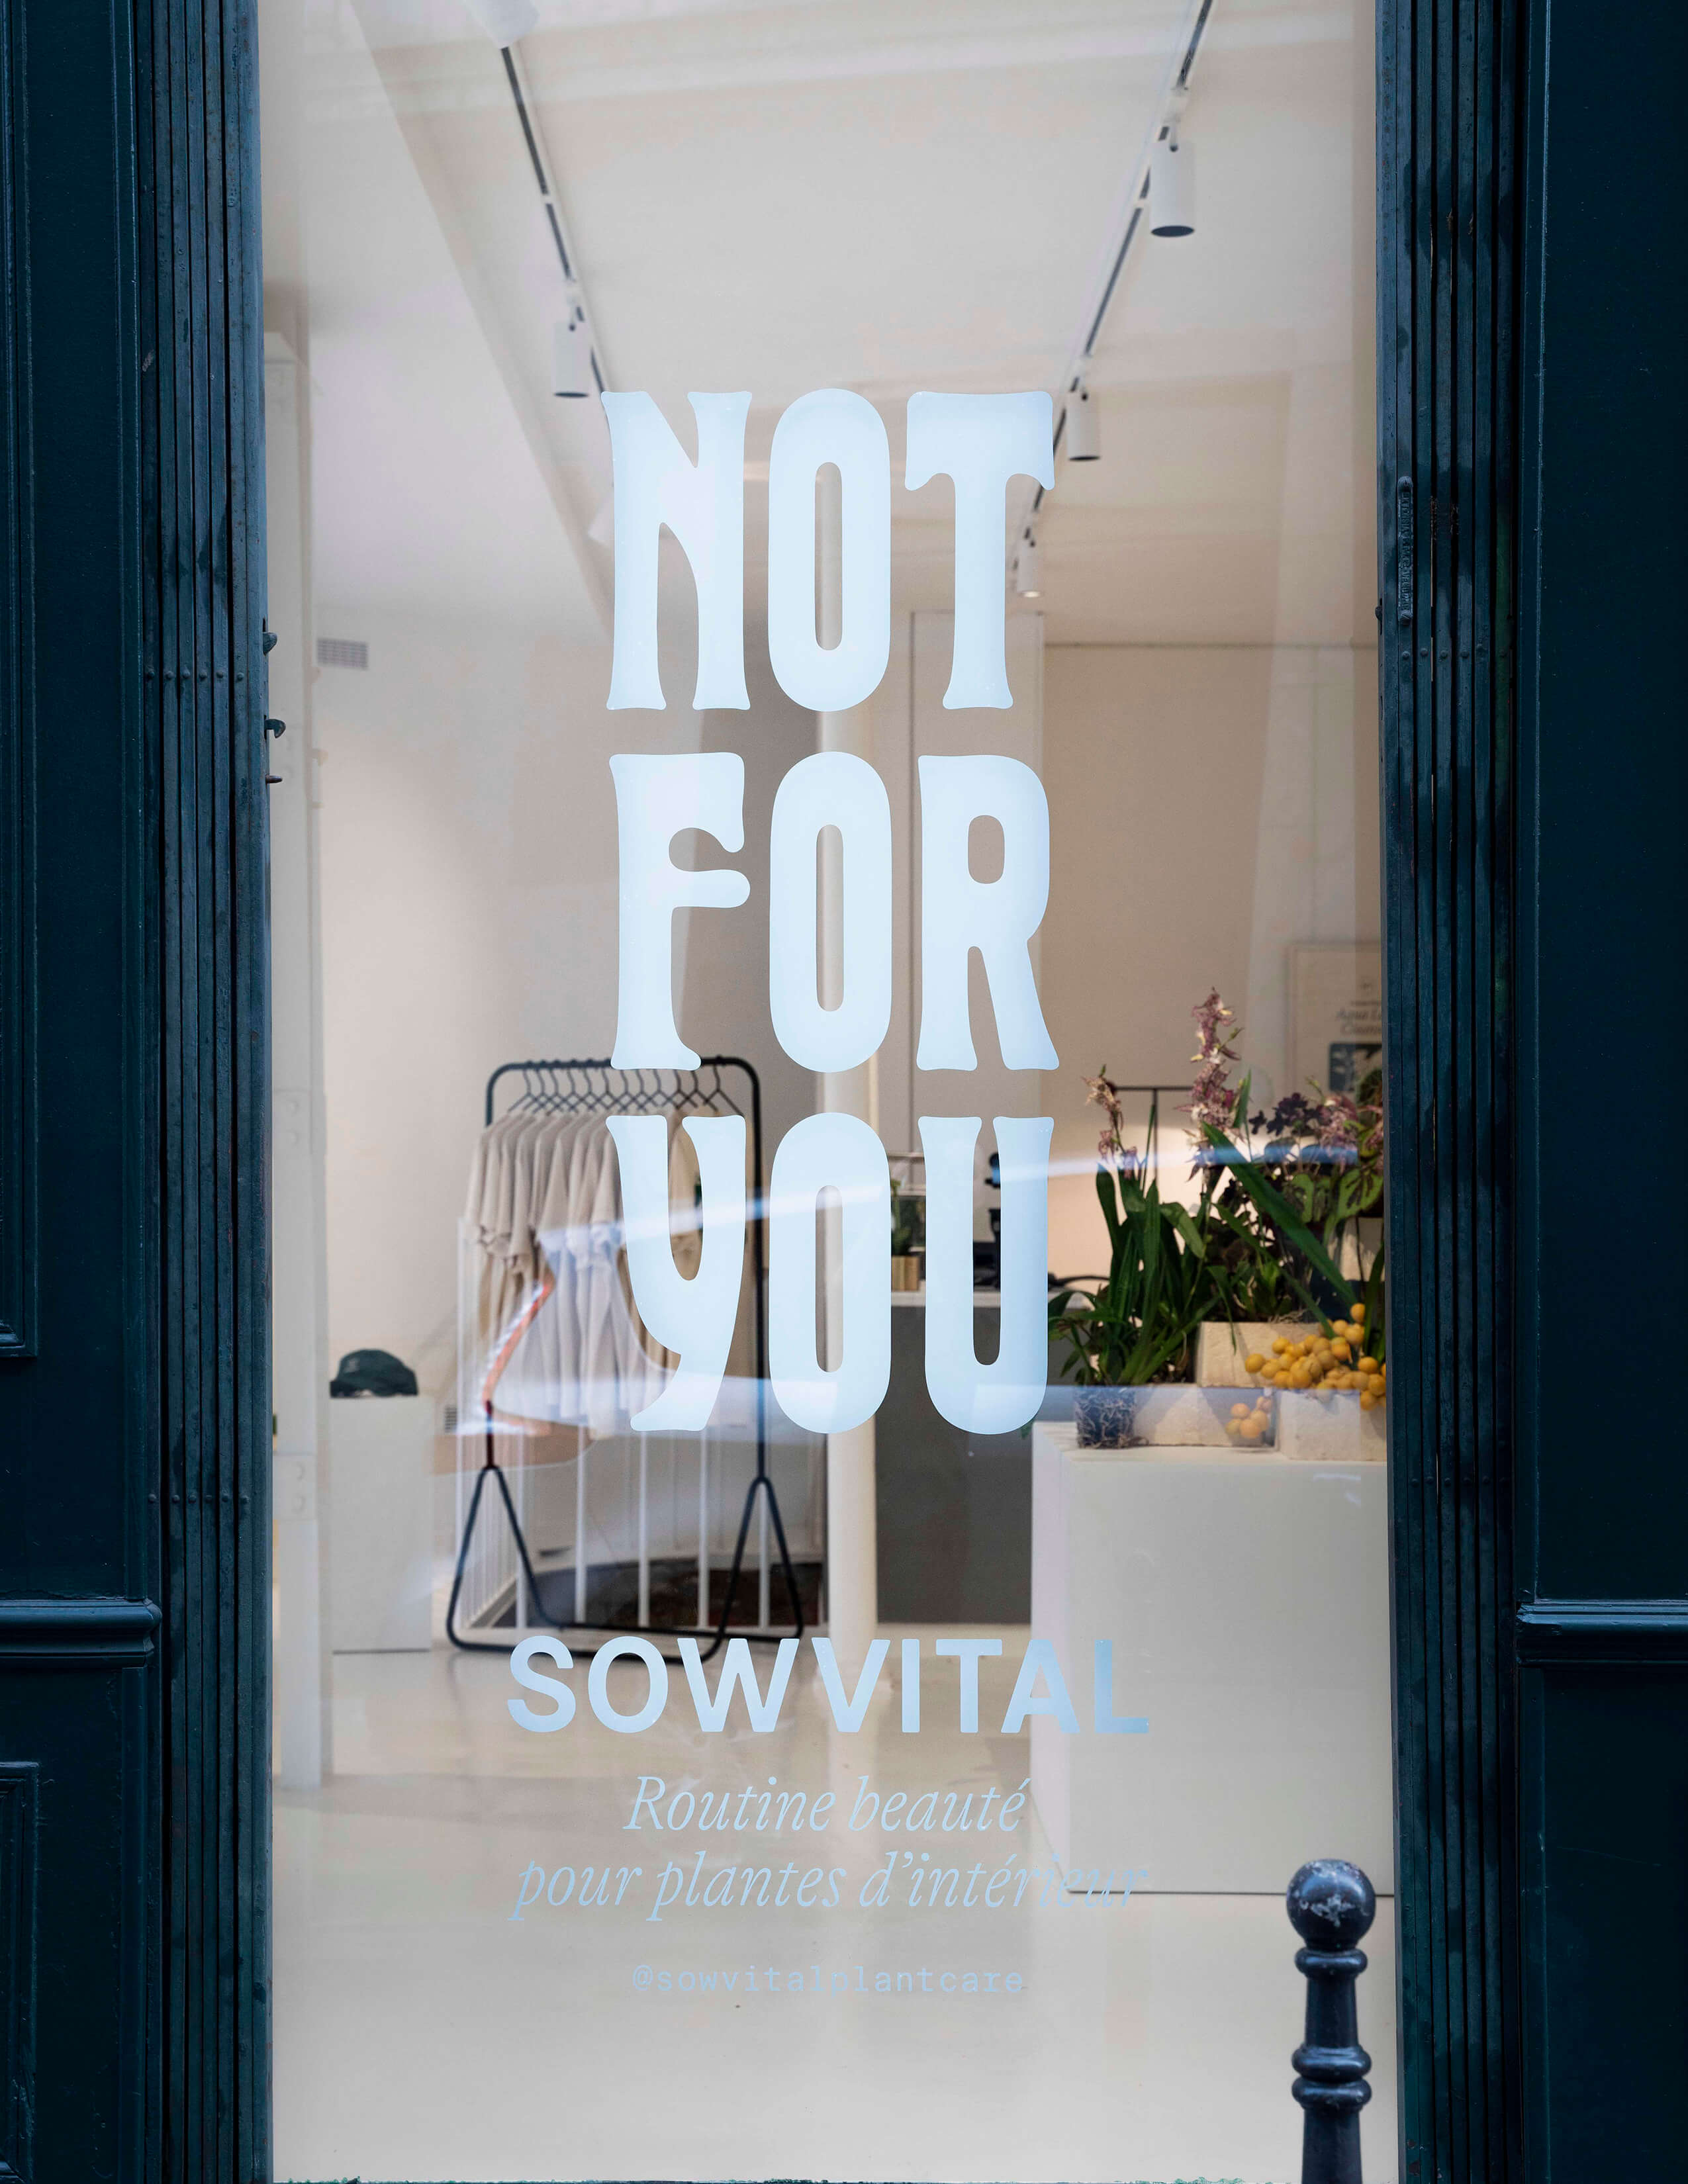 A glass shopwindow labelled with ‘Not for you’ Sowvital brand. Merchandise are being displayed nicely on clothing racks.